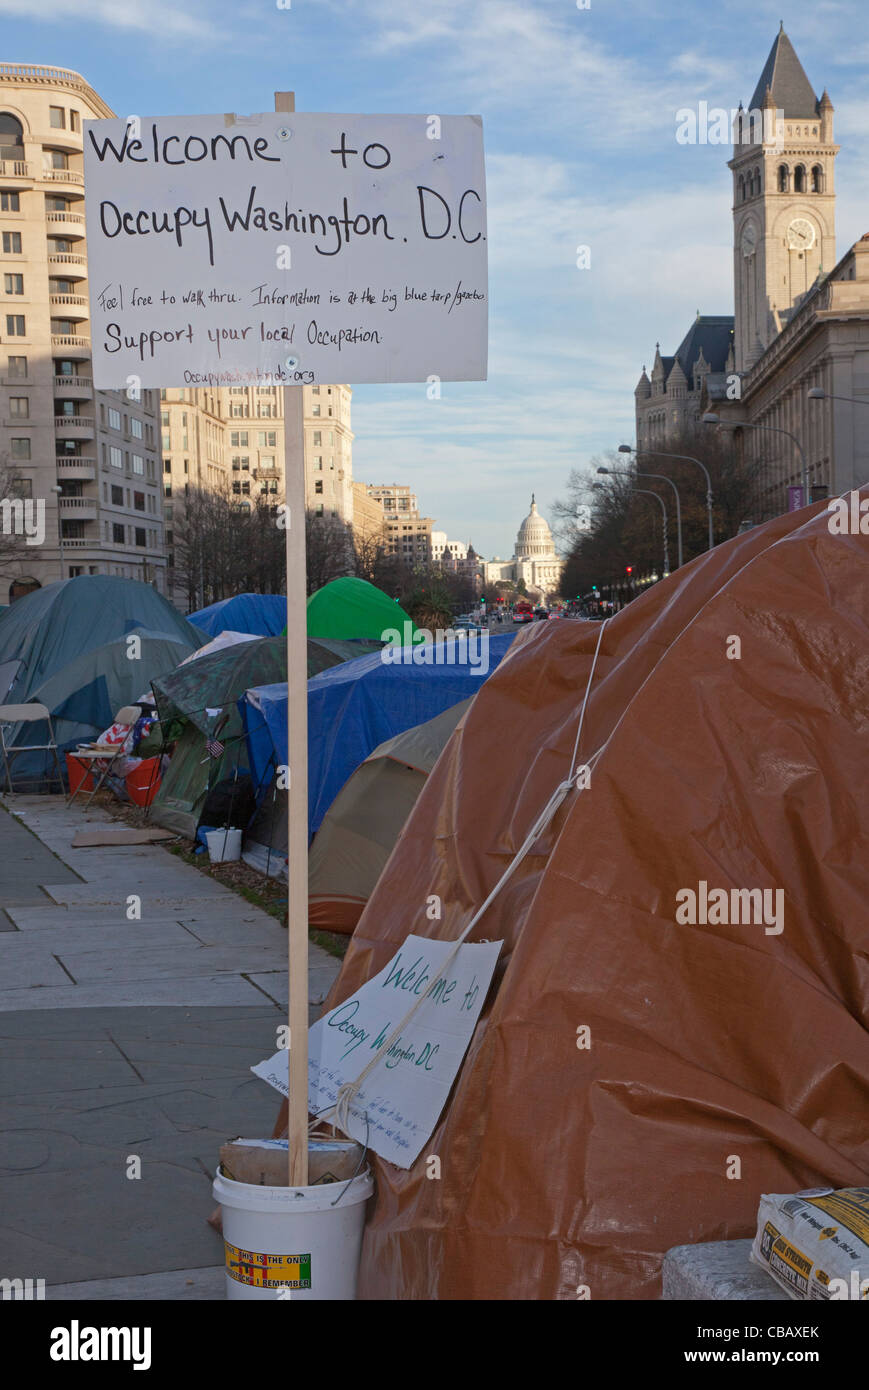 Washington, DC - The Occupy Washington DC camp on Freedom Plaza, just up the street from the U.S. Capitol. Stock Photo